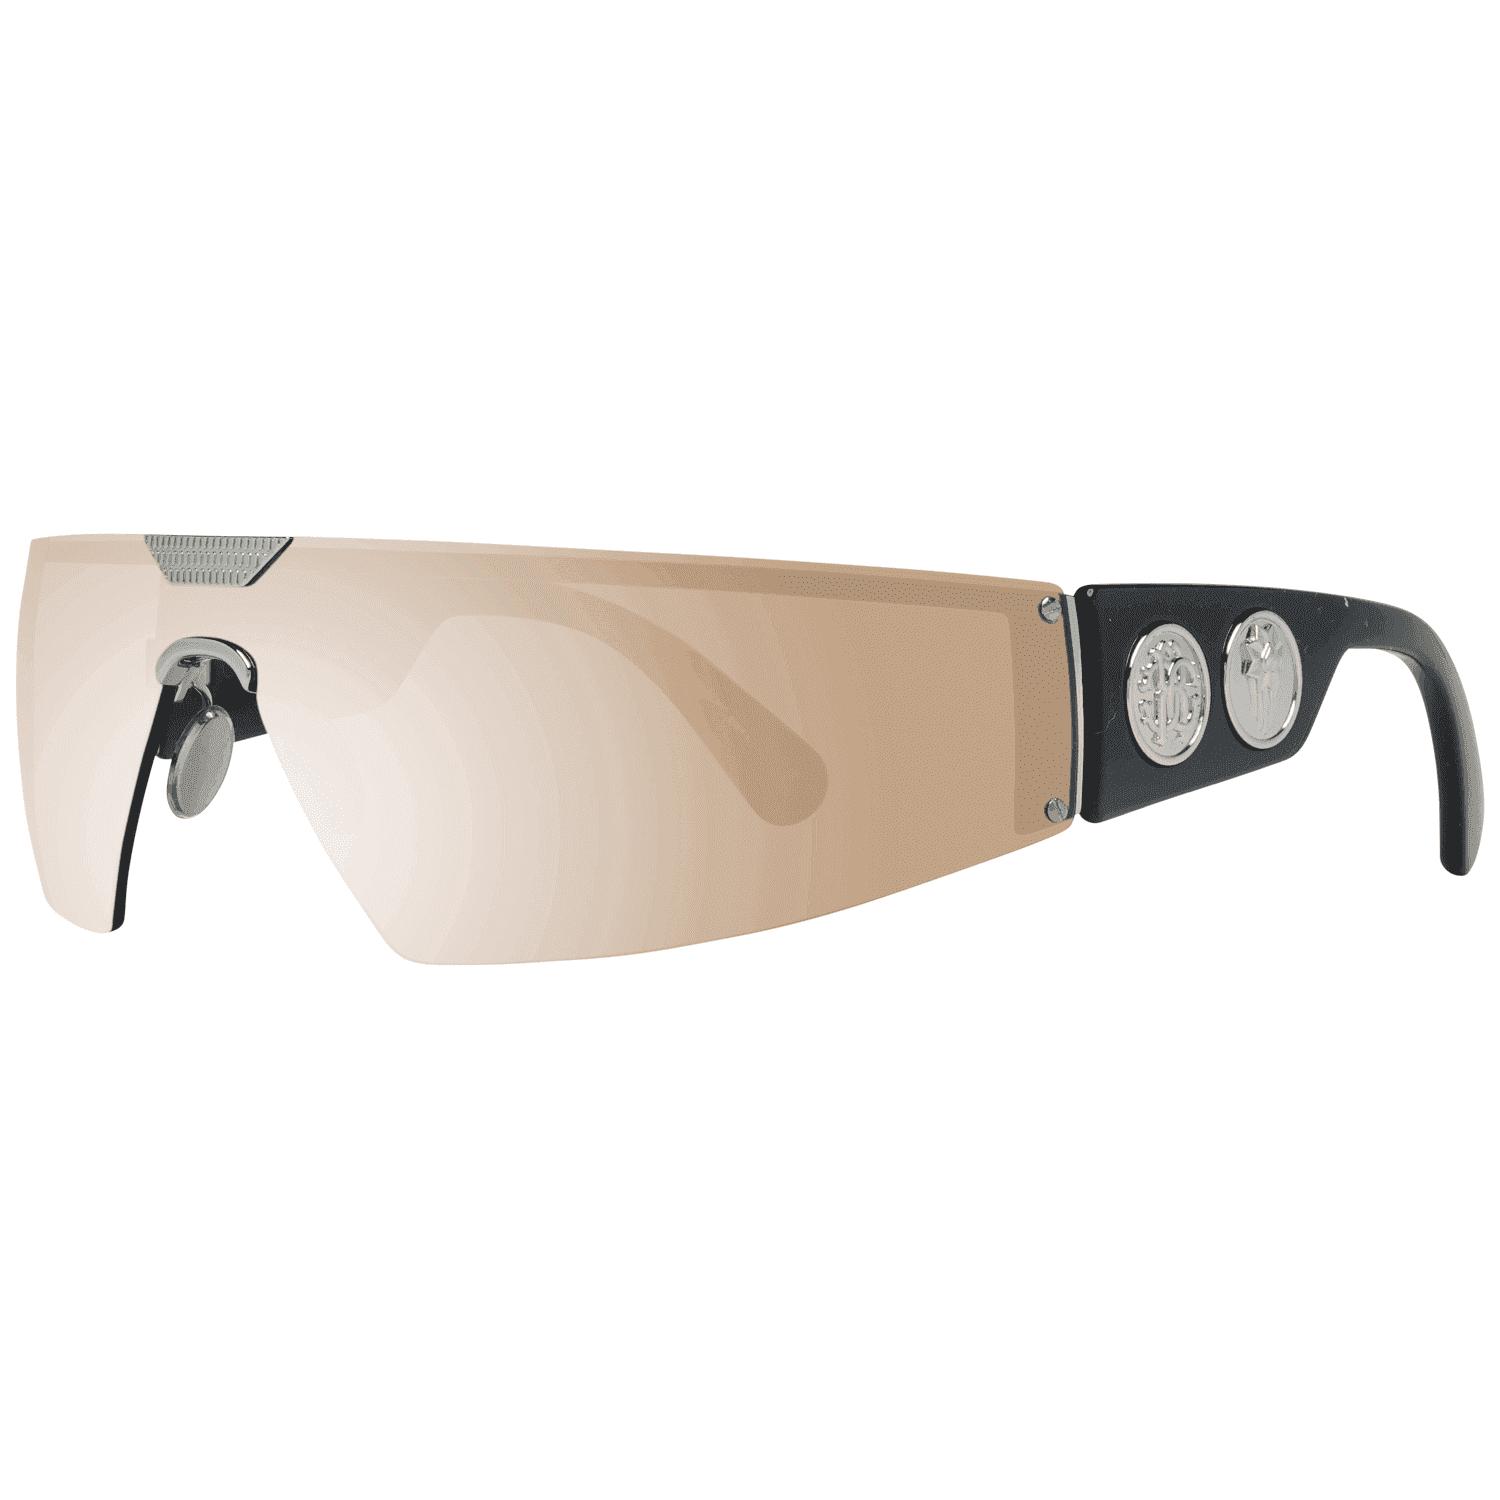 Ray-Ban RB3016 Clubmaster Flash Lenses 114517 Sunglasses Review |  VisionDirectAU - YouTube